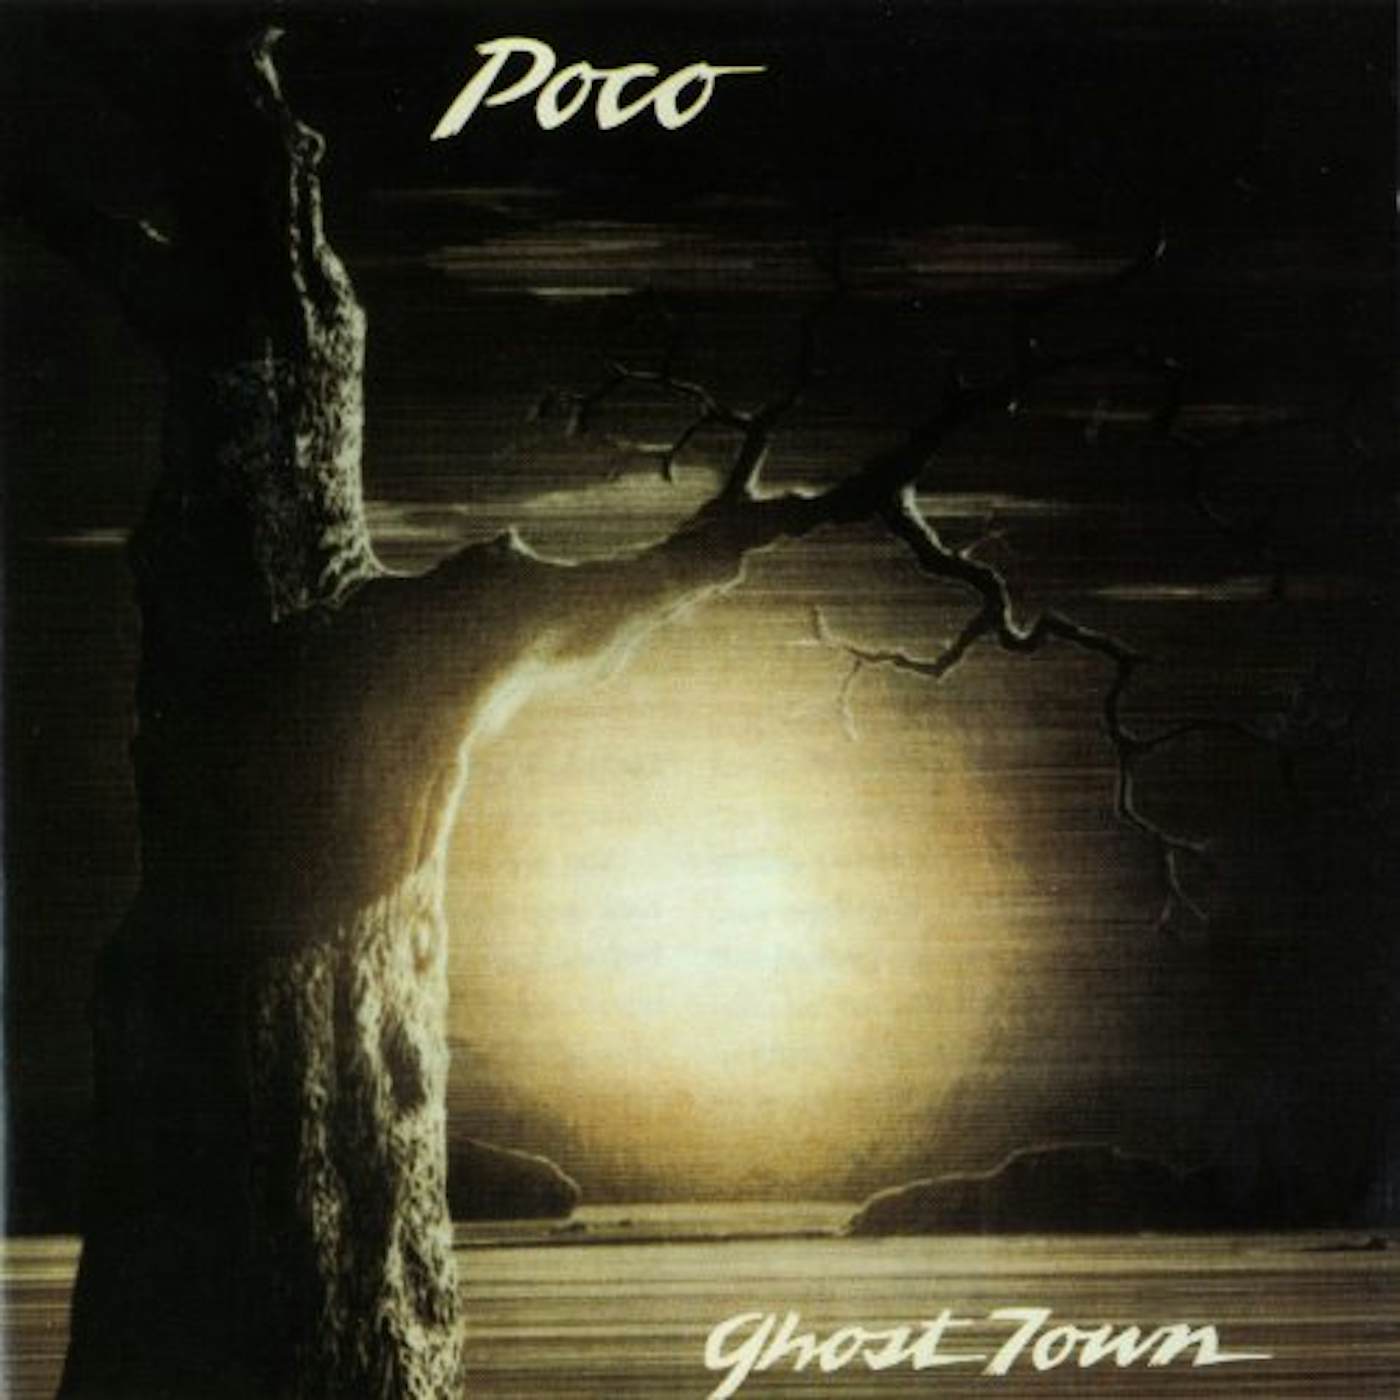 Poco GHOST TOWN CD